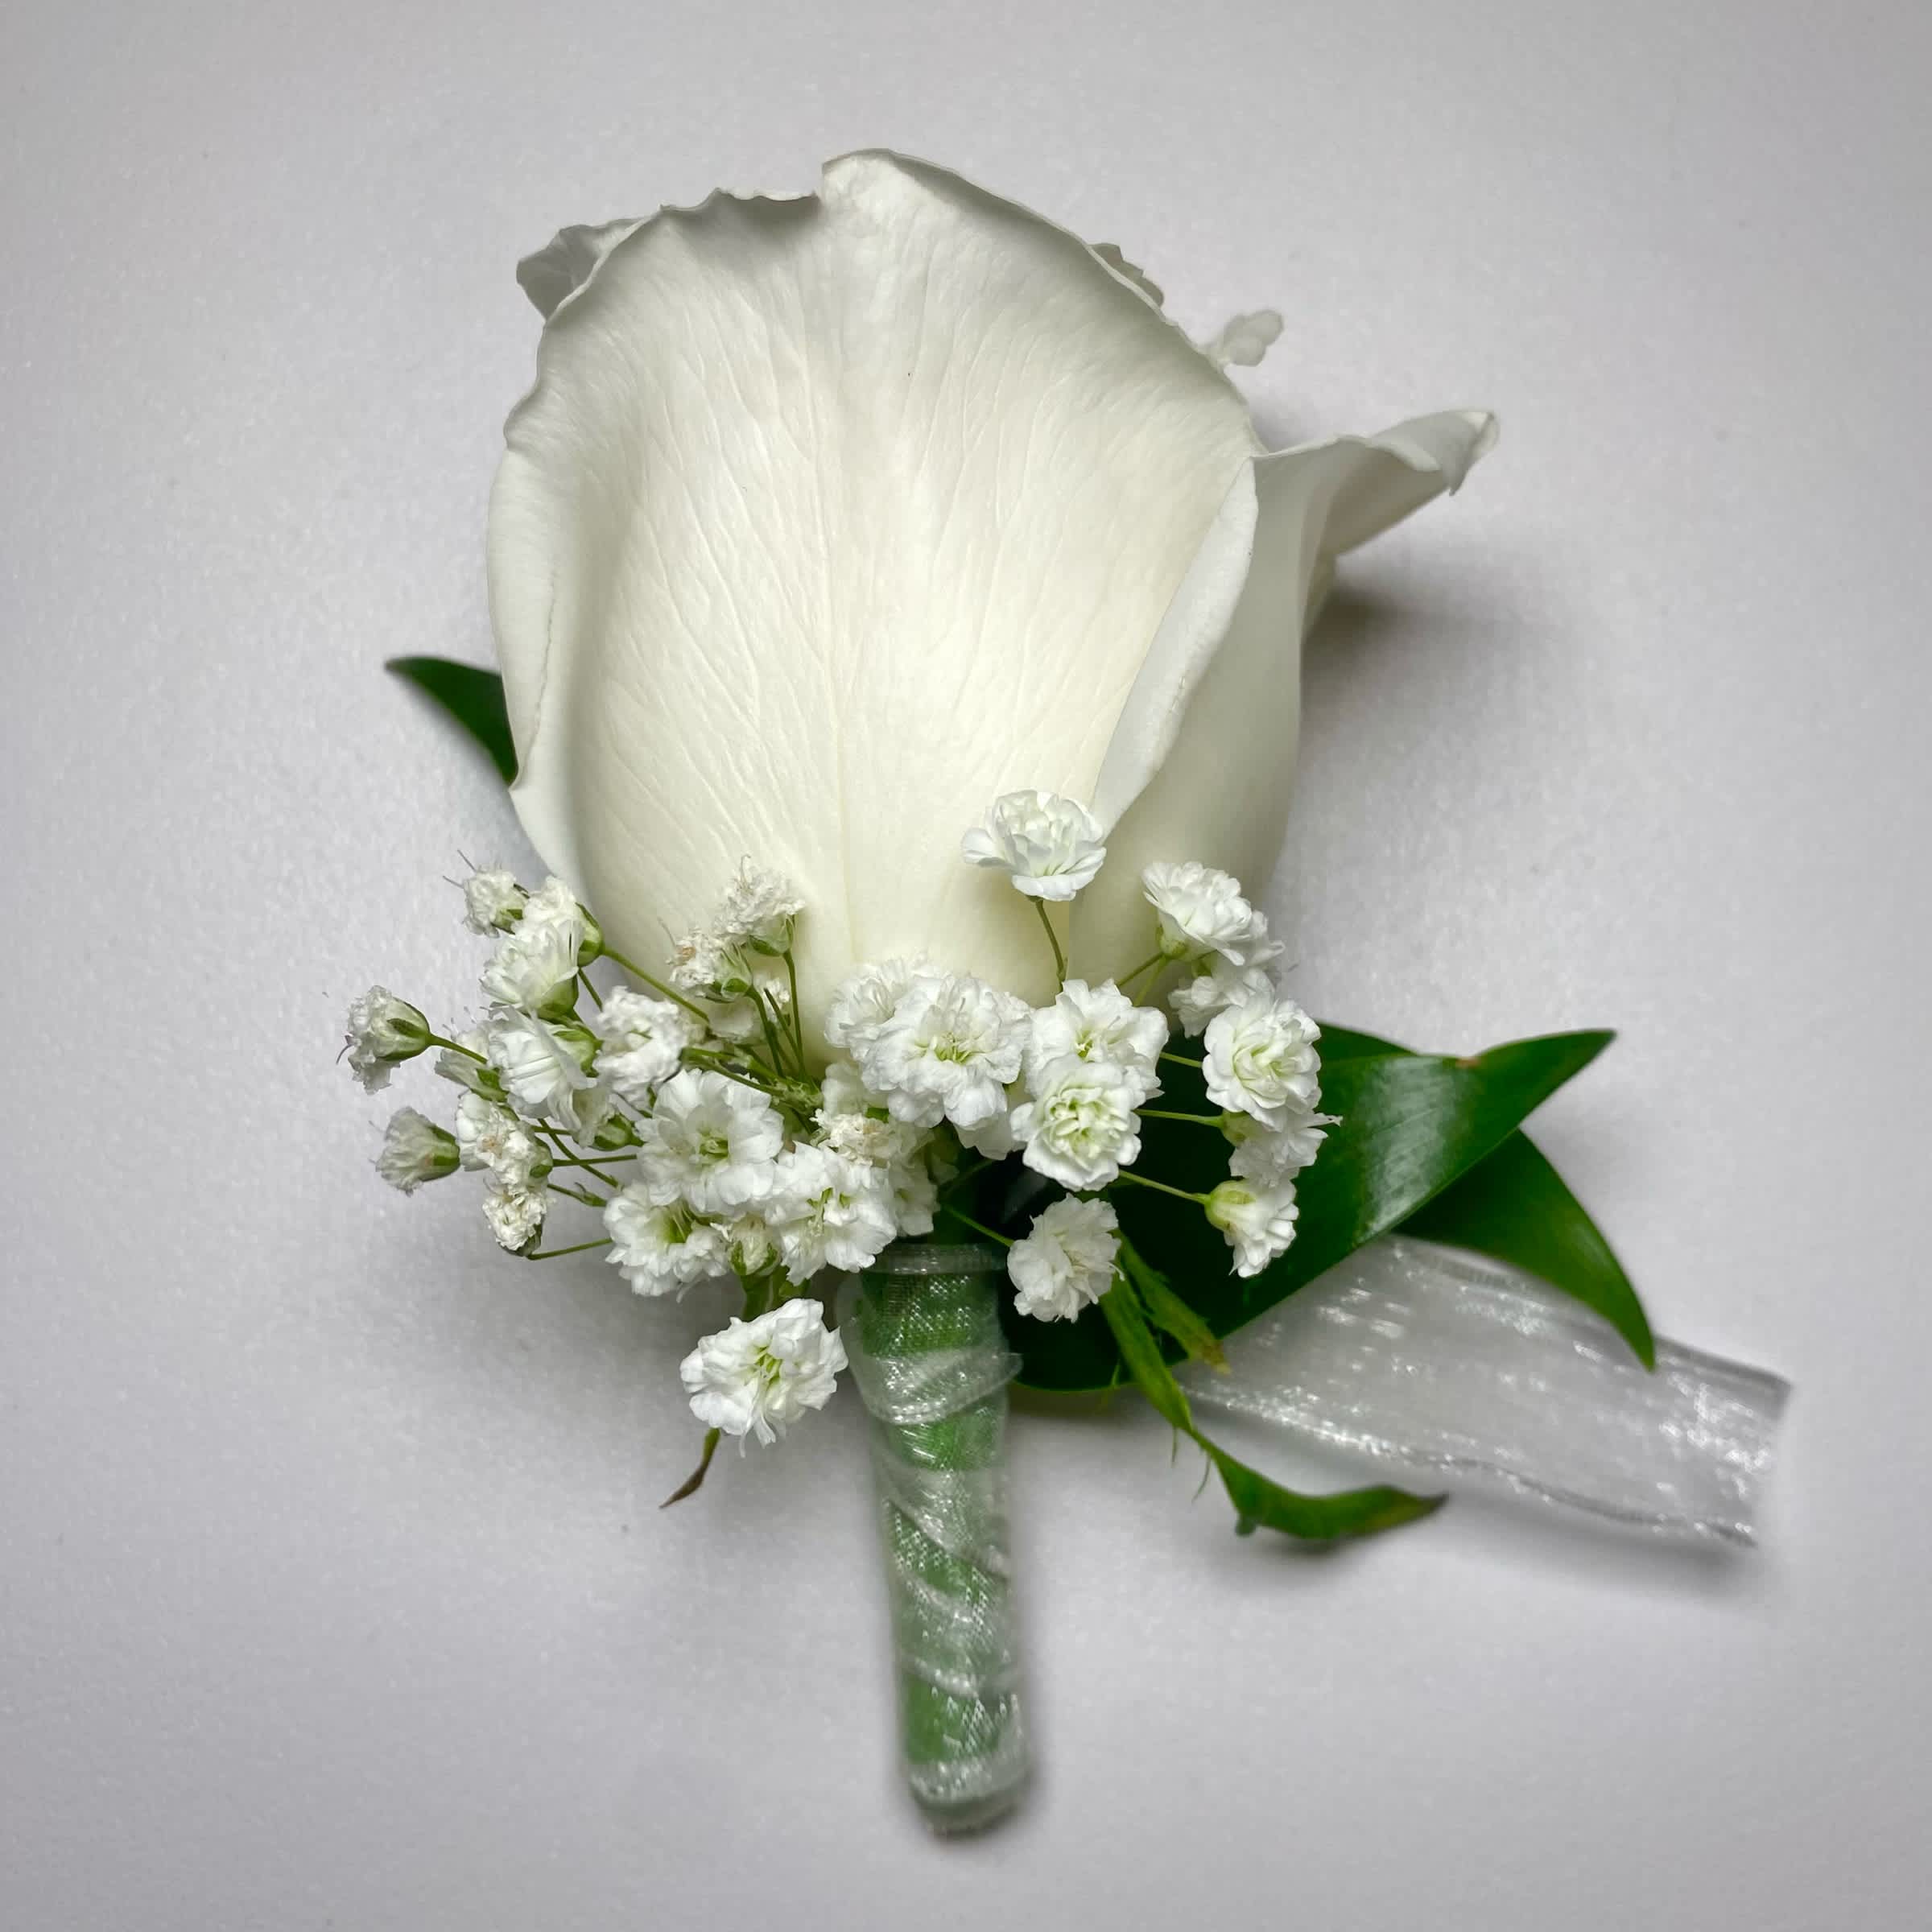 White/ White Rose Boutonniere - Prom/ Wedding - This White Rose Boutonniere Includes, White Chiffon Ribbon, White Rose, Babies Breath, and Gentle Greenery. Or as Similar as Possible. 